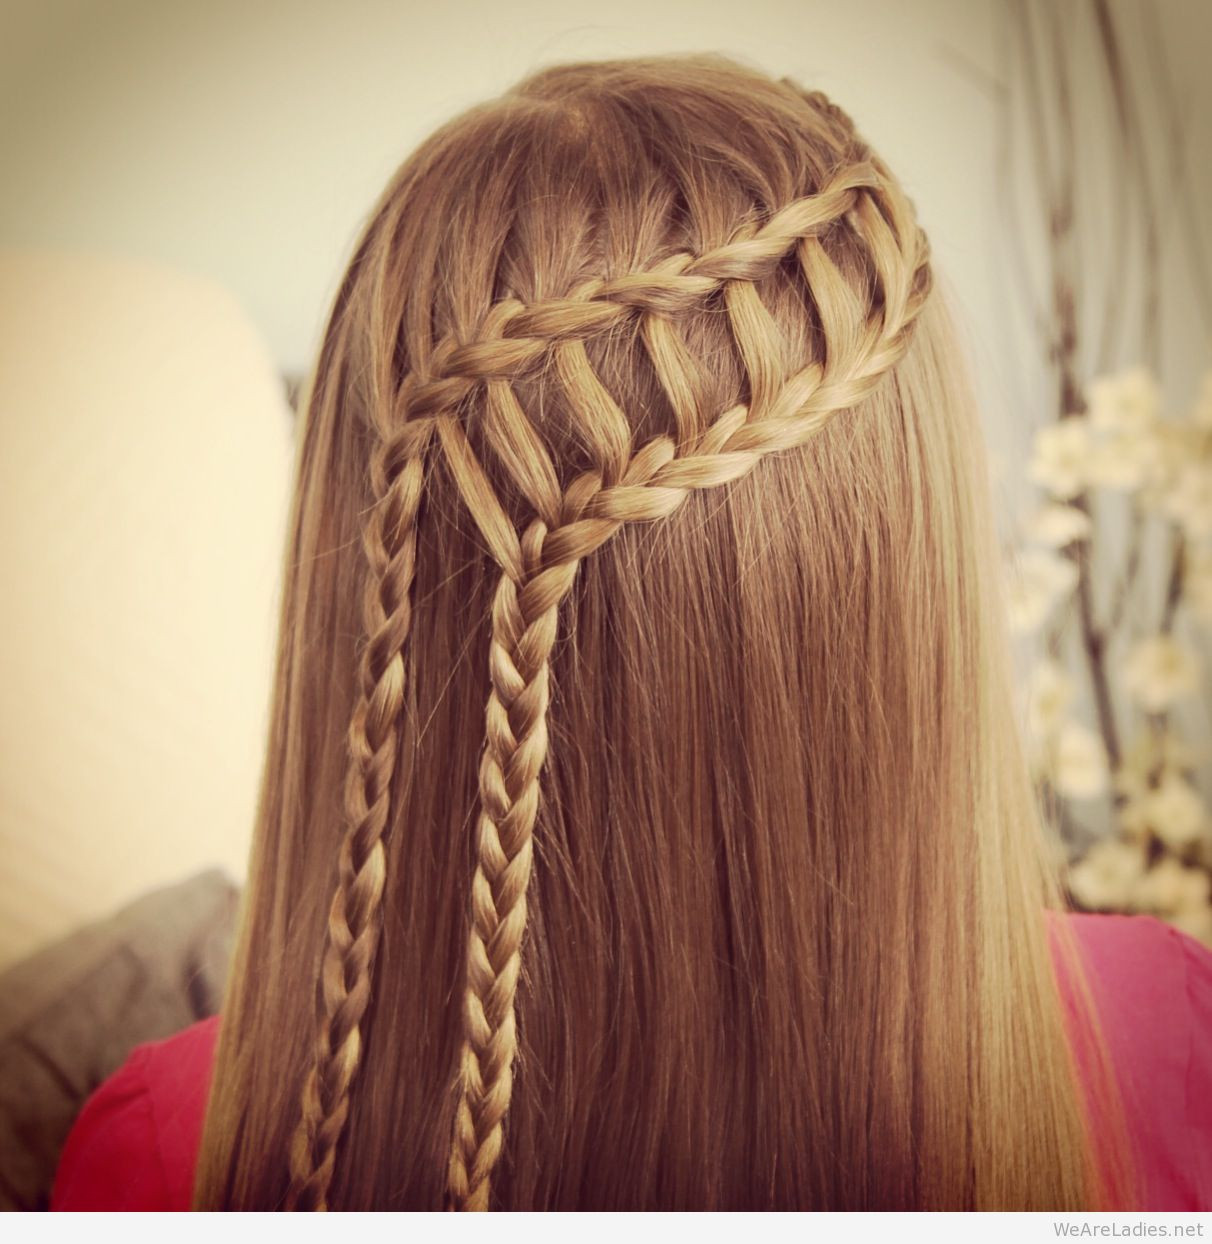 Braids Hairstyle Pics
 Awesome hairstyles tumblr ideas